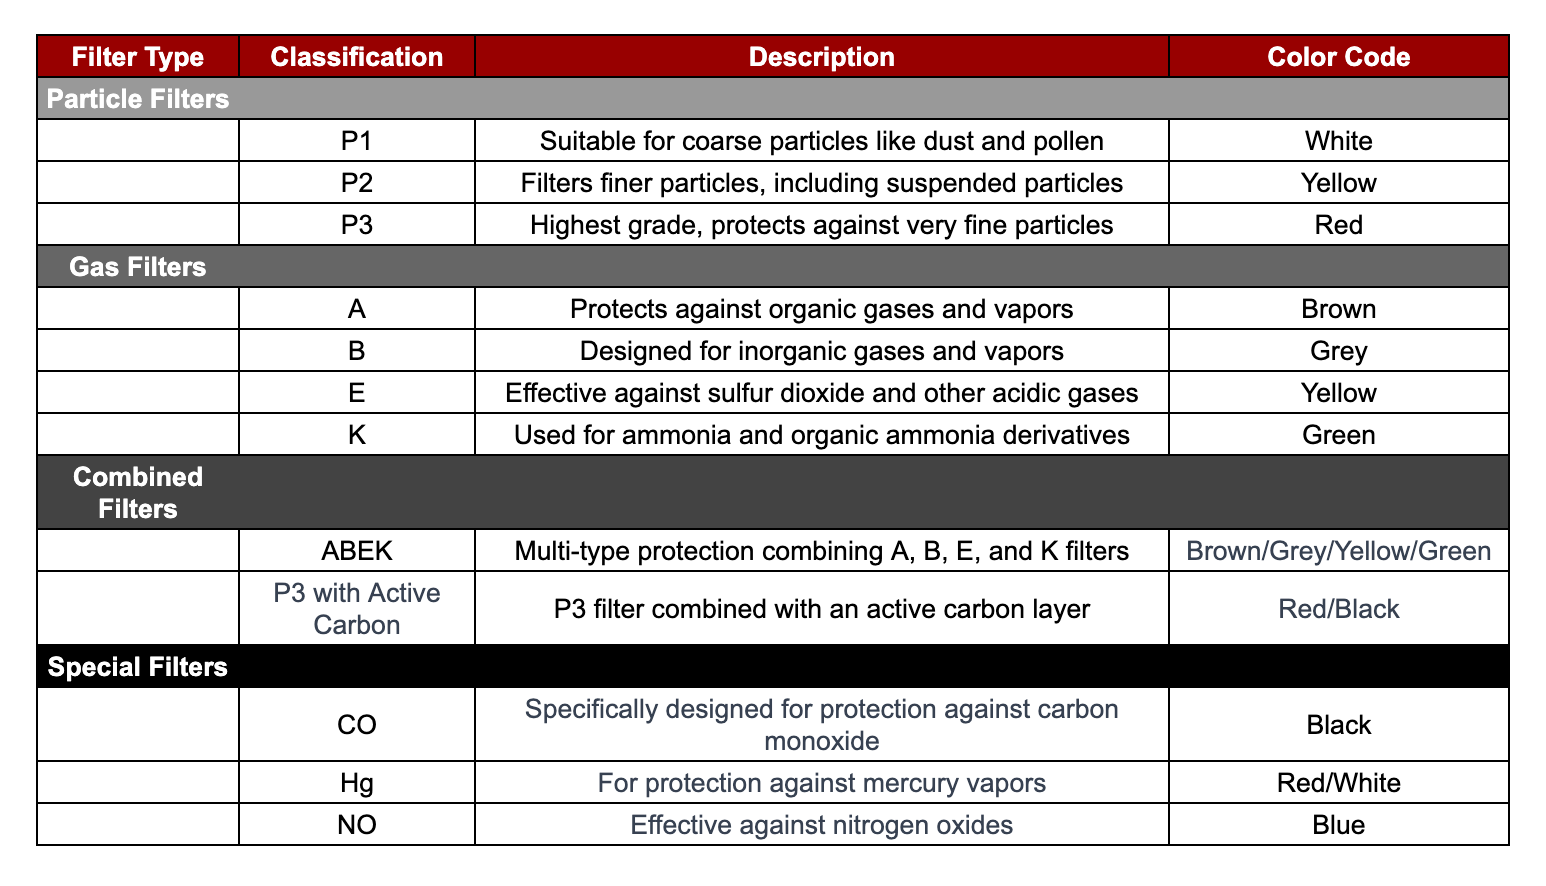 Table showing gas mask filter classifications and their color codes